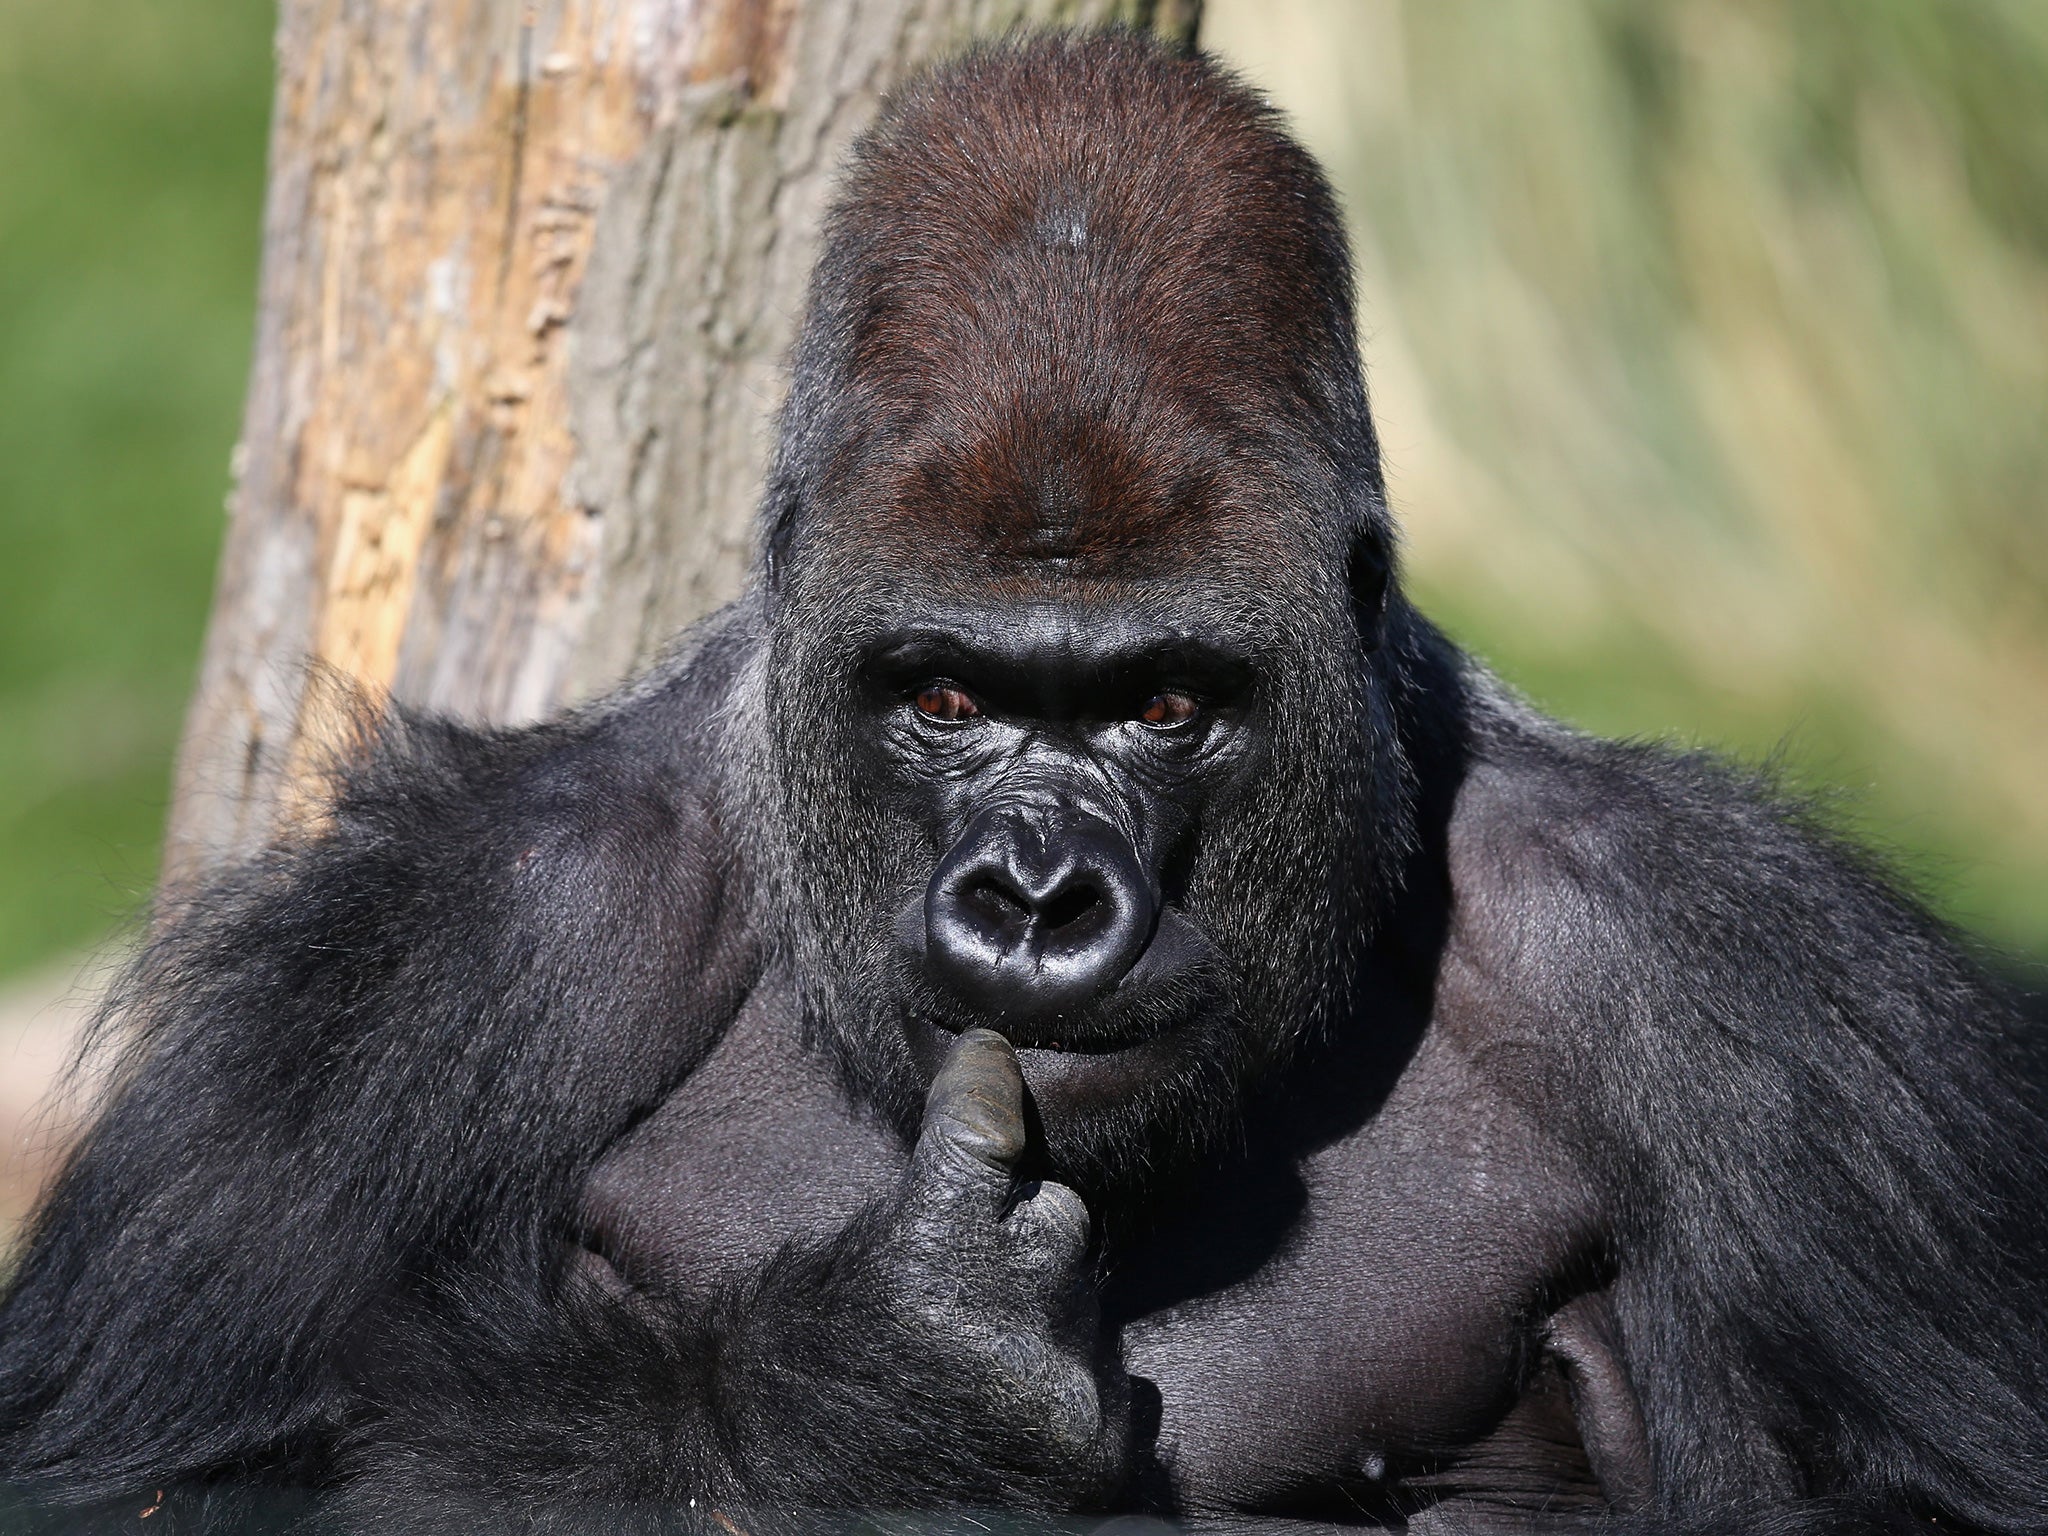 Gorillas and other animals can 'let down their guard' when they spend time around humans